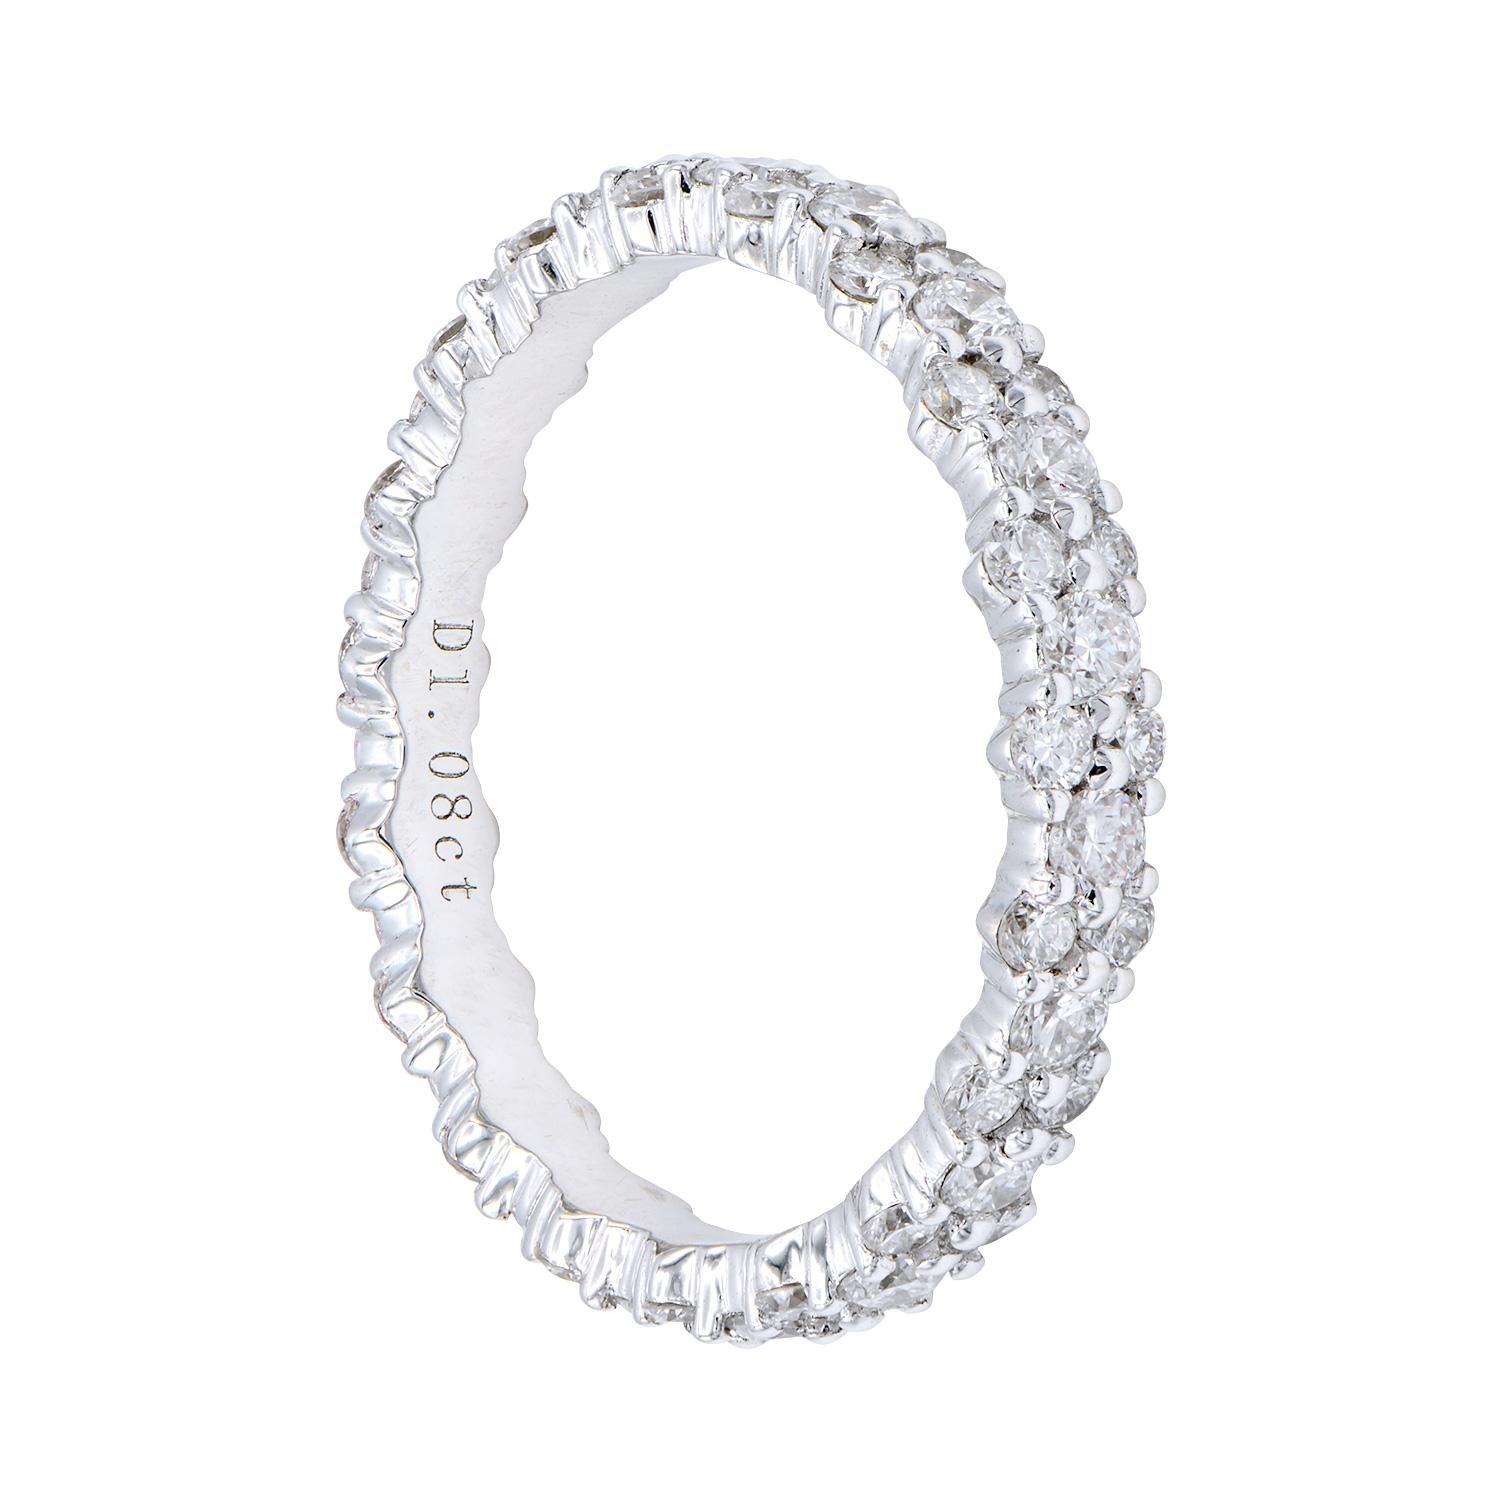 This diamond eternity band changes up the the classic straight row of diamonds by alternating between one big diamond and then two smaller diamonds stacked on top of each other. This ring is still classic and timeless just with a unique quality.